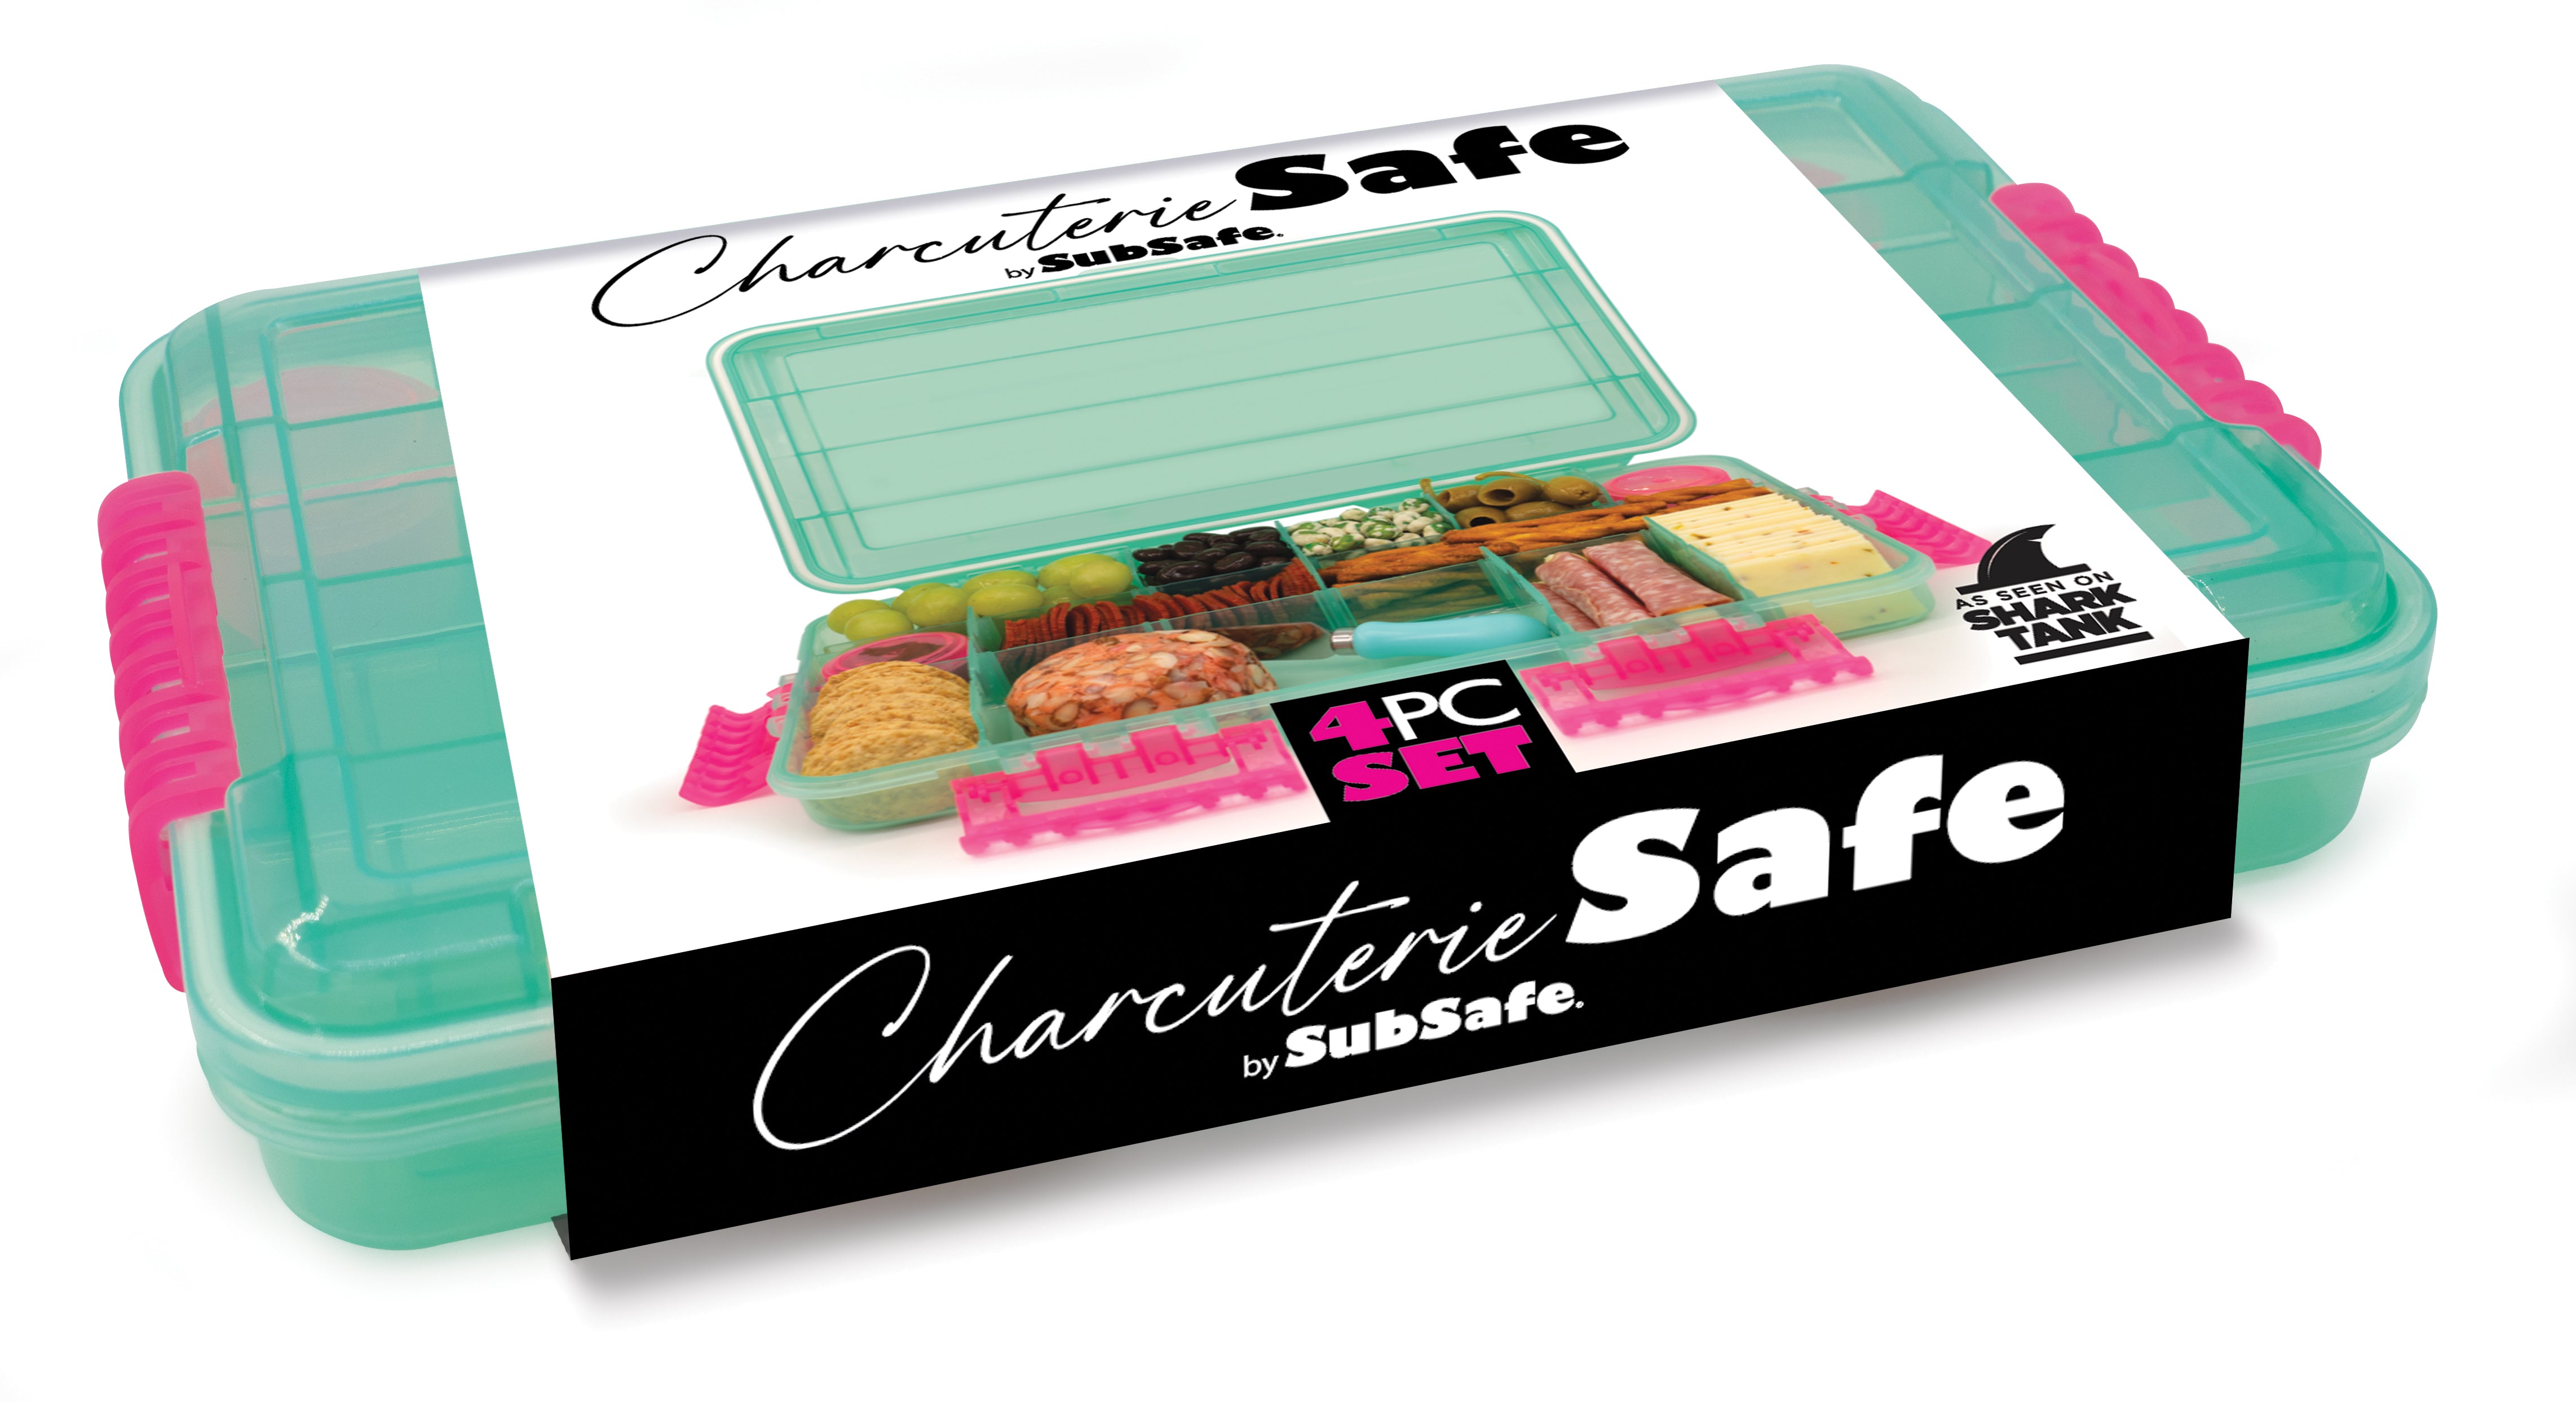 Charcuterie Safe: Snack Set For On The Go!